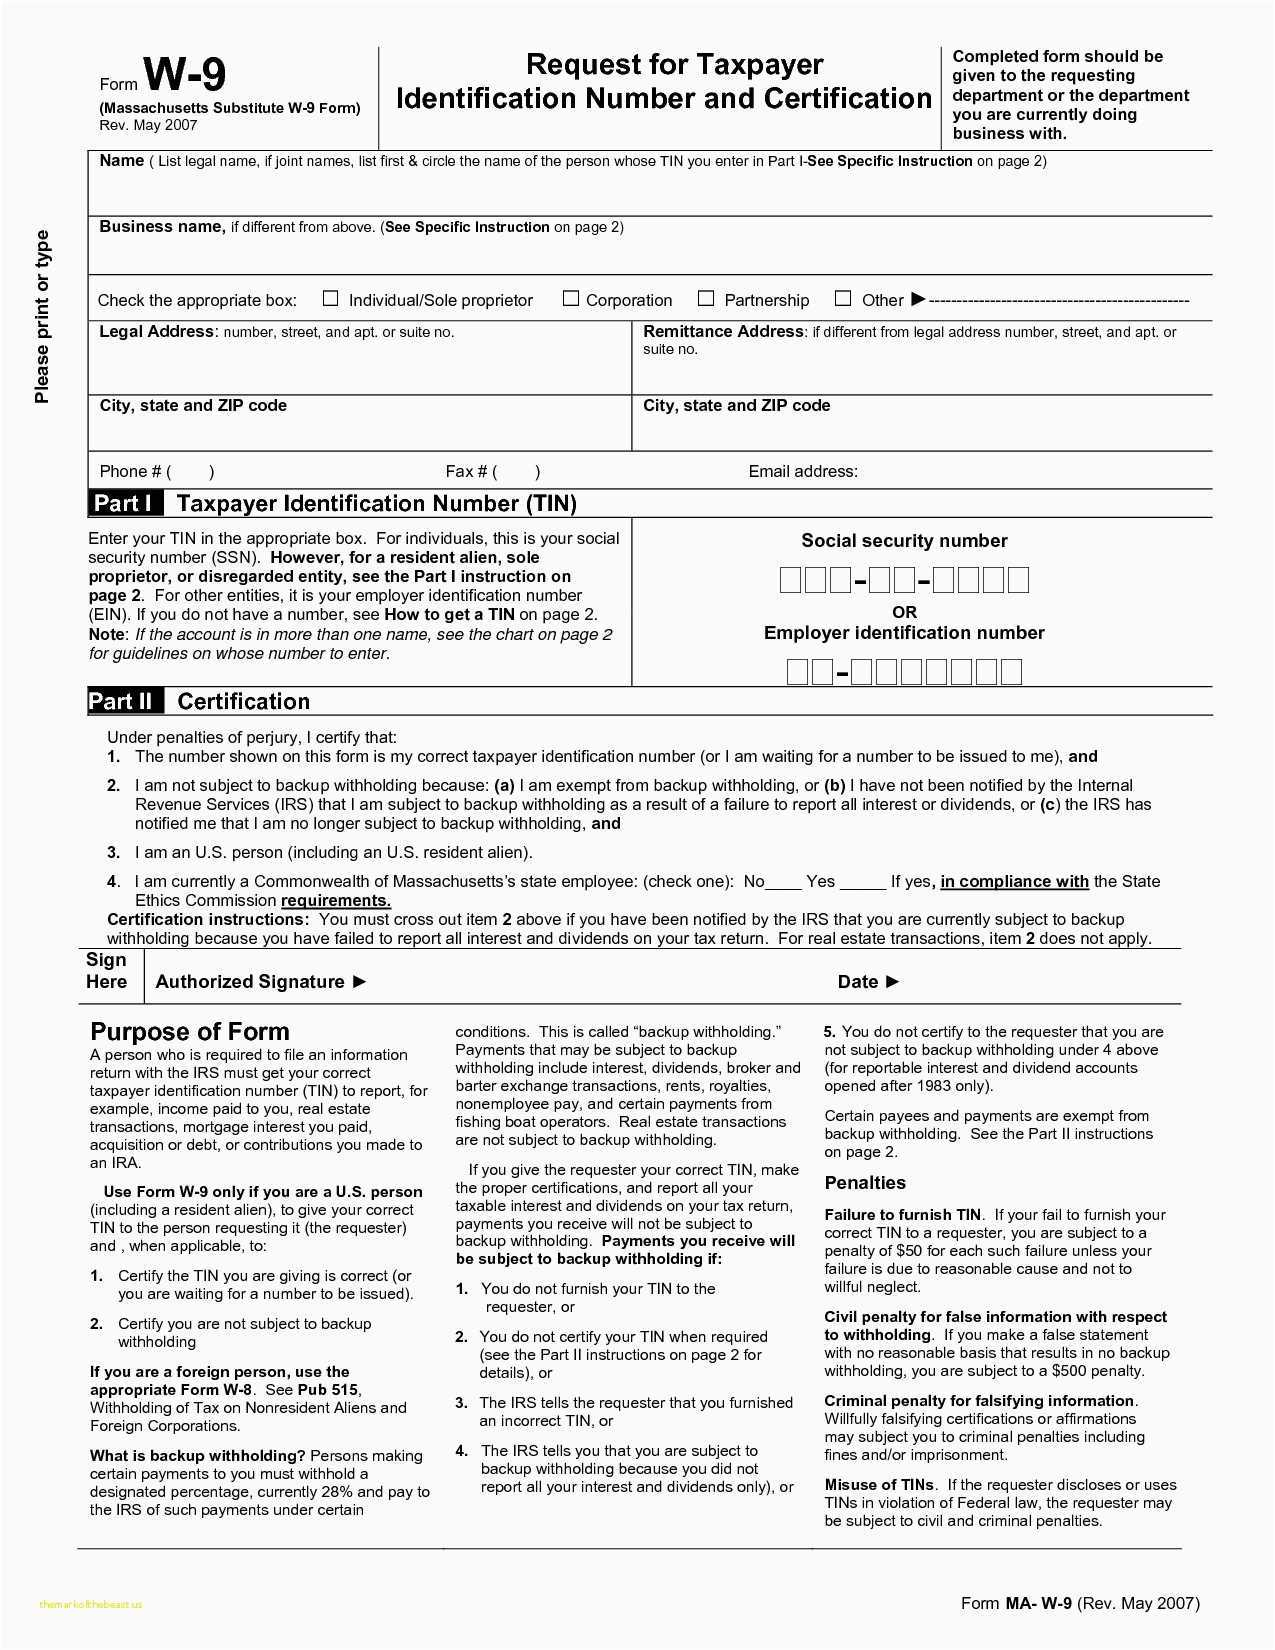 W 9 Forms For Independent Contractors 2018 W9 Template S W 9 Tax - Free Printable W 9 Form